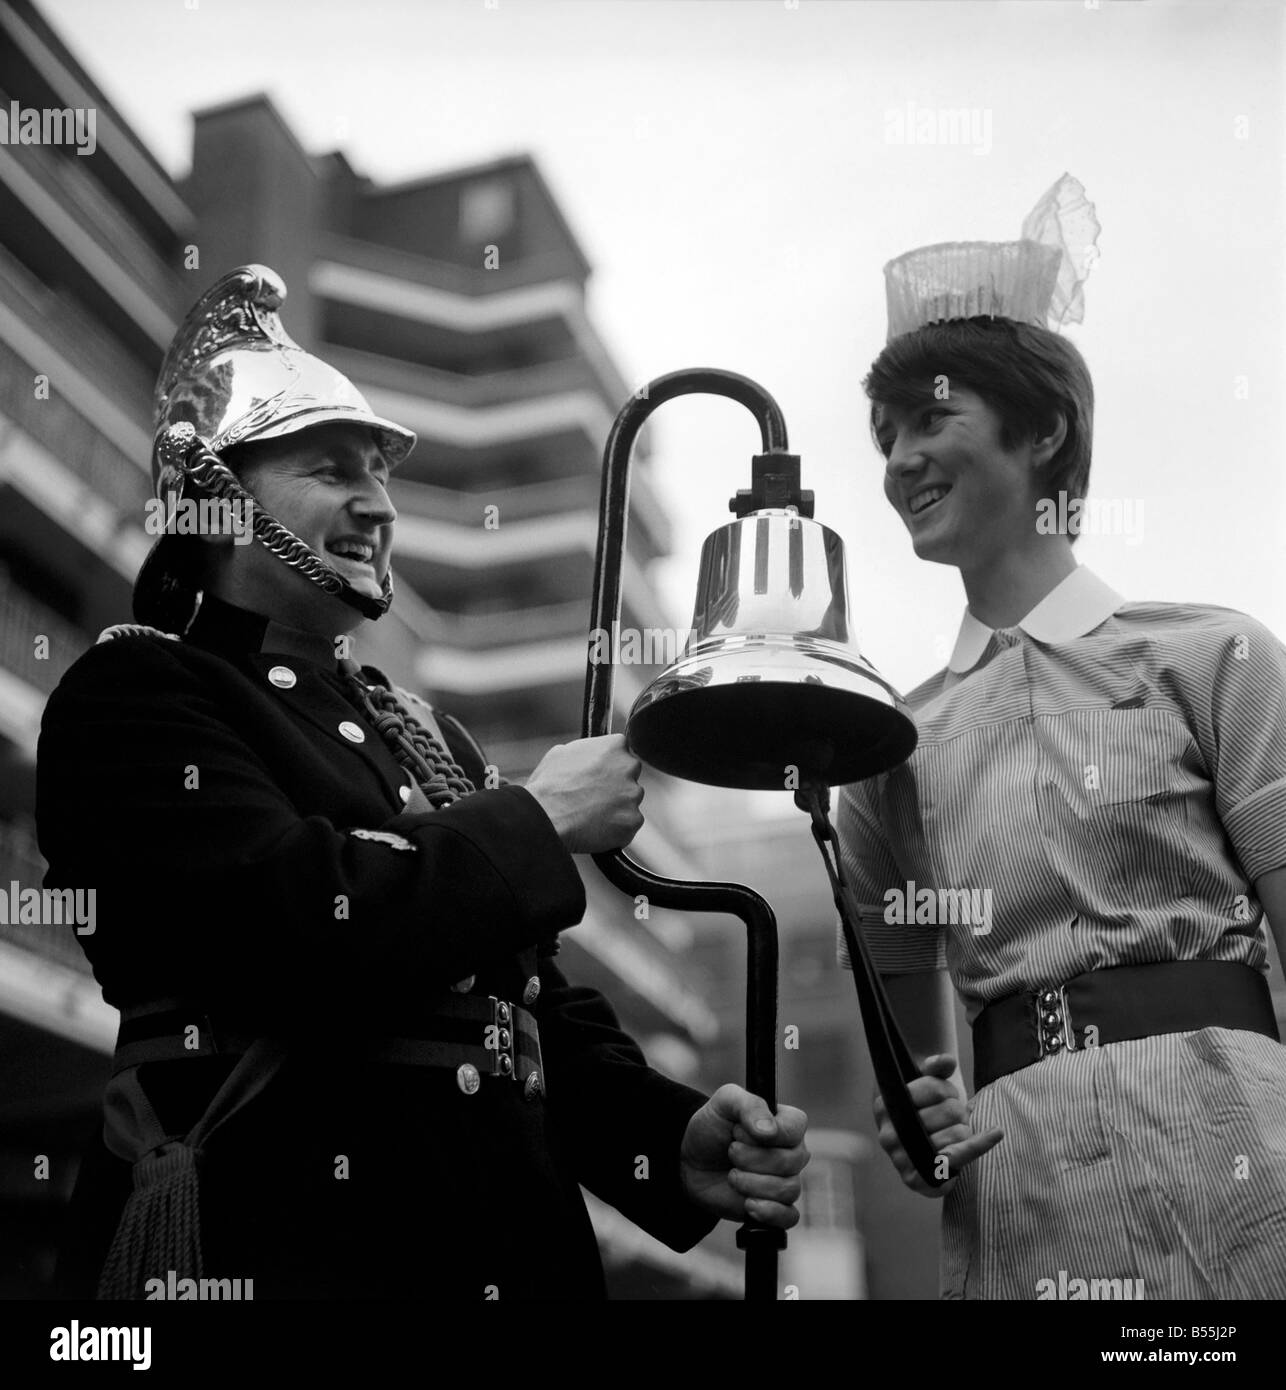 21 year old nurse, Angela Wyatt from St. Thomas's hospital went to the London fire Brigade Headquarters, Lambeth, to collect a fire bell which was wanted on loan for The Malcolm Sargent Cancer fund for children, Christmas Carol concert held at the festival hall. Trying out the fire bell with Leading Fireman Joe Wills, is Nurse Angela Wyatt. December 1969 Z12149 Stock Photo